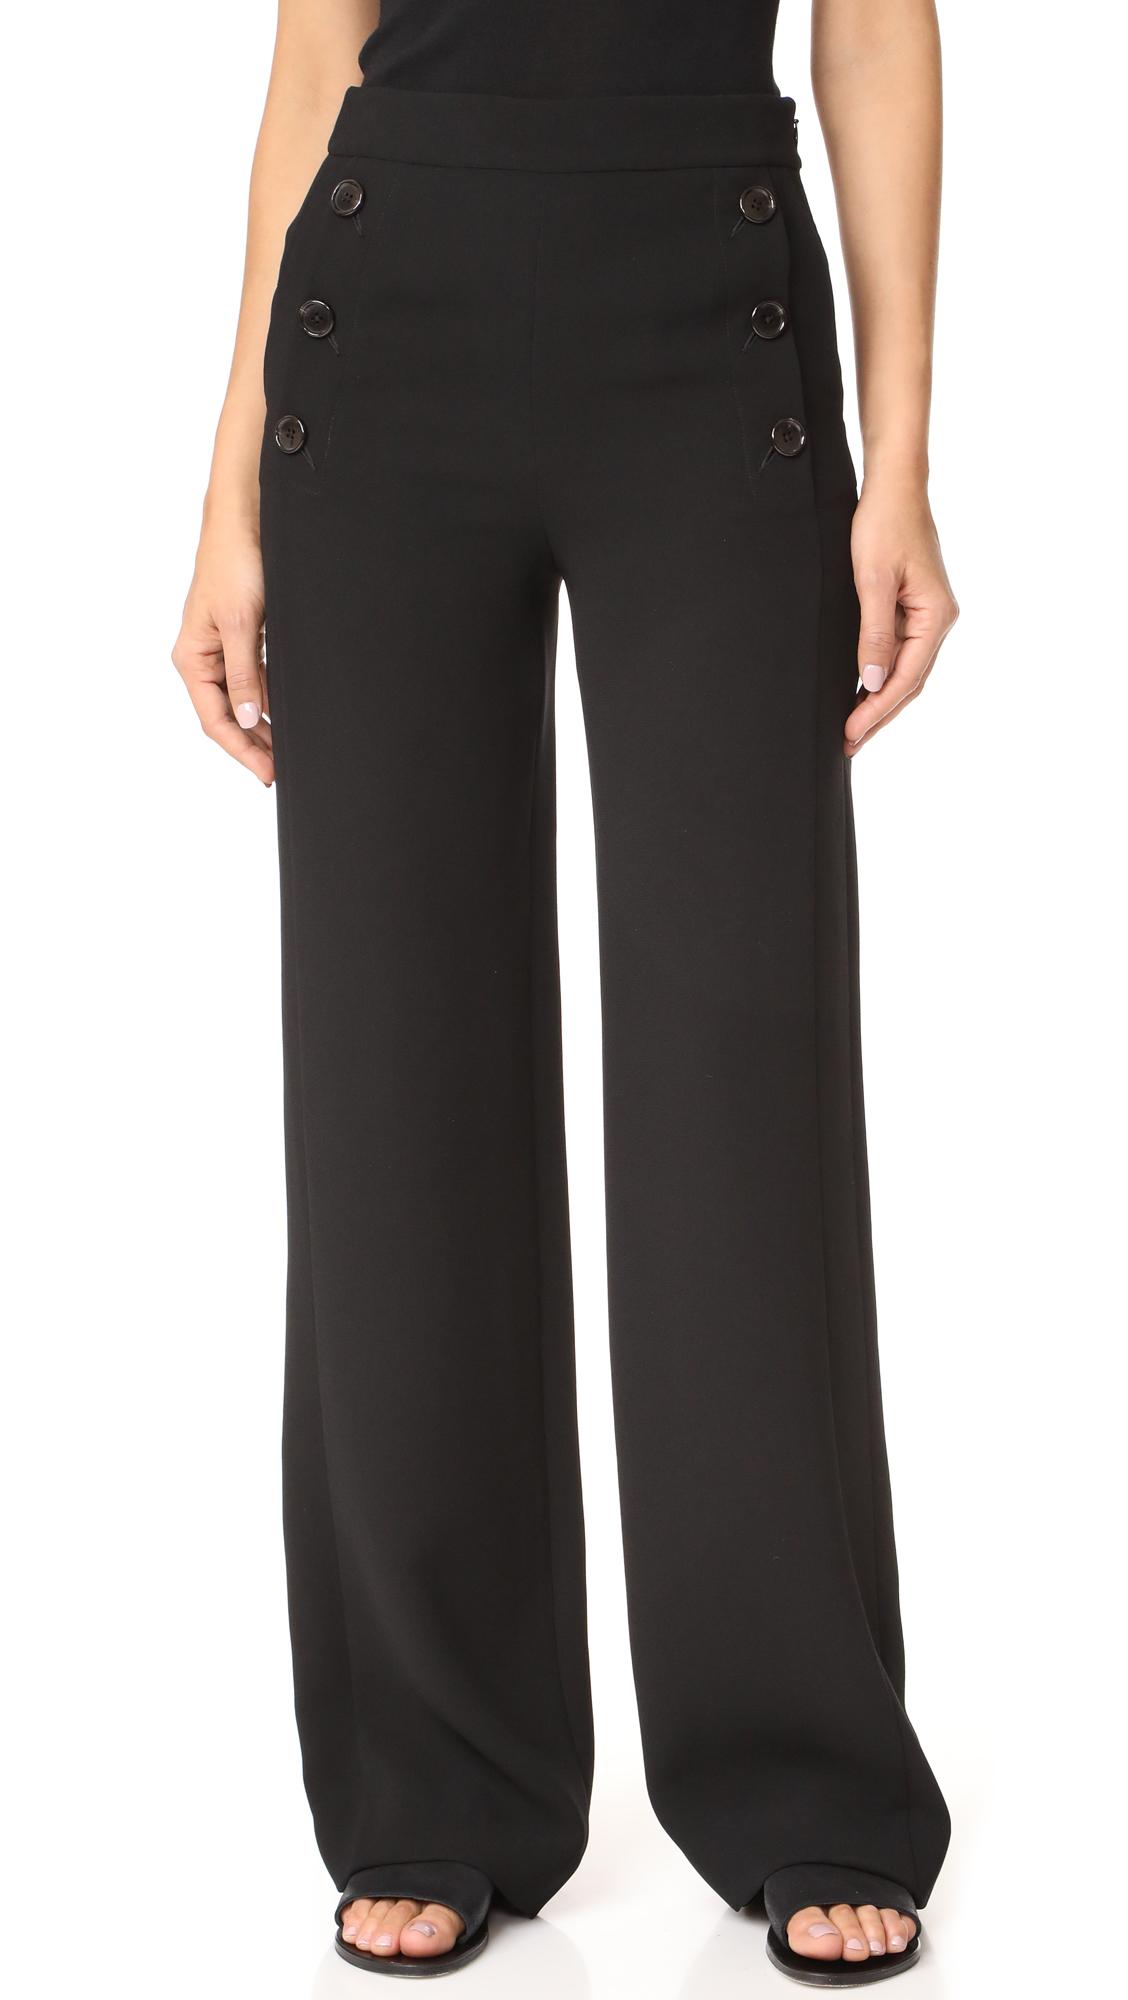 DKNY Synthetic High Waisted Sailor Pants in Black - Lyst